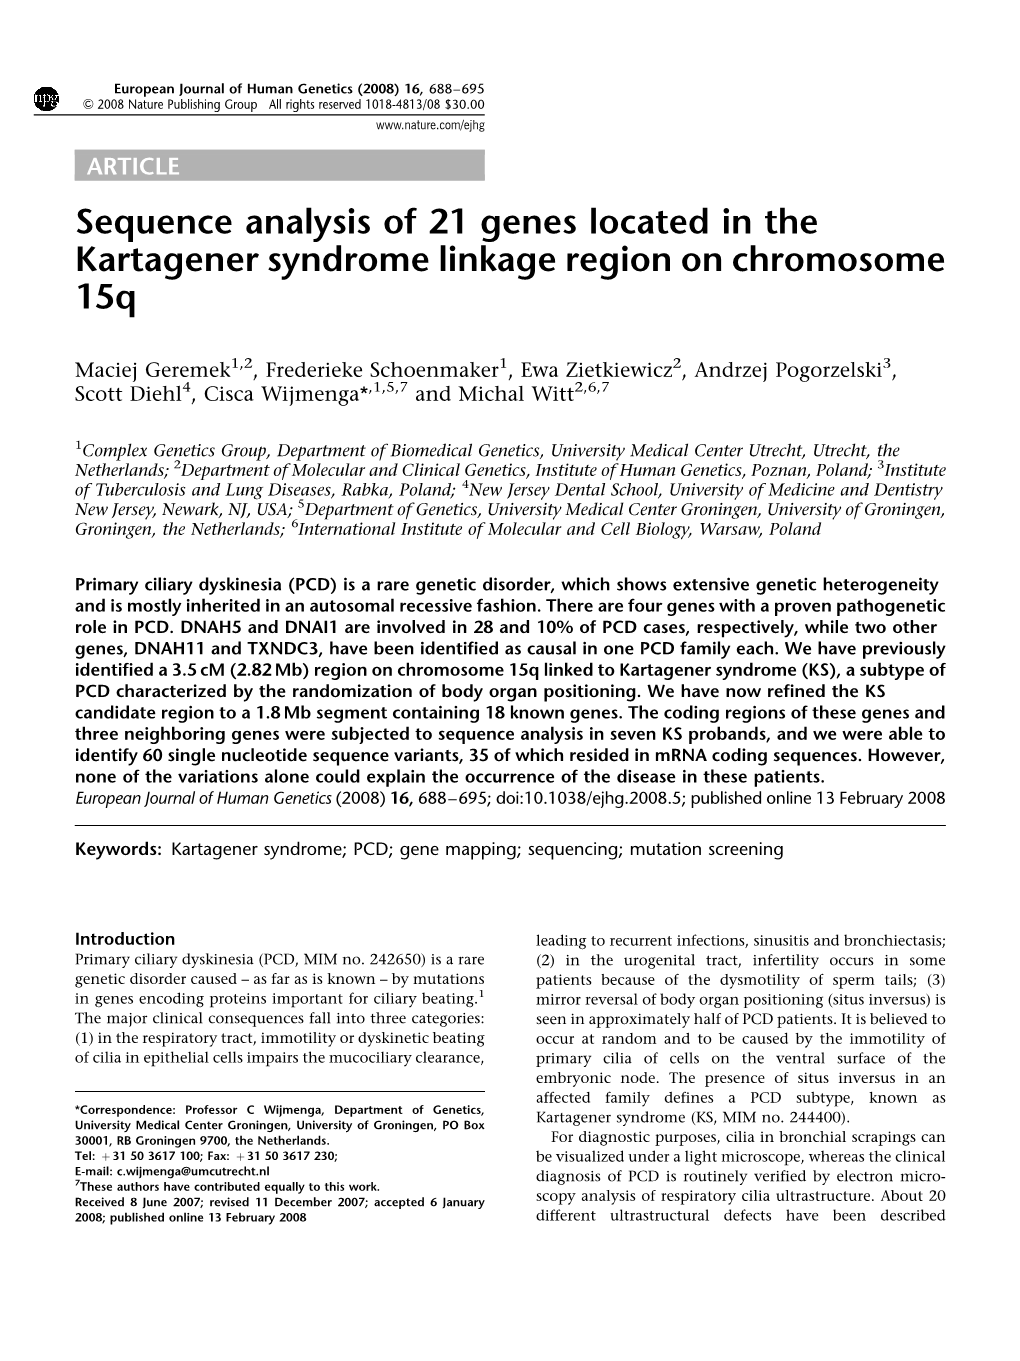 Sequence Analysis of 21 Genes Located in the Kartagener Syndrome Linkage Region on Chromosome 15Q